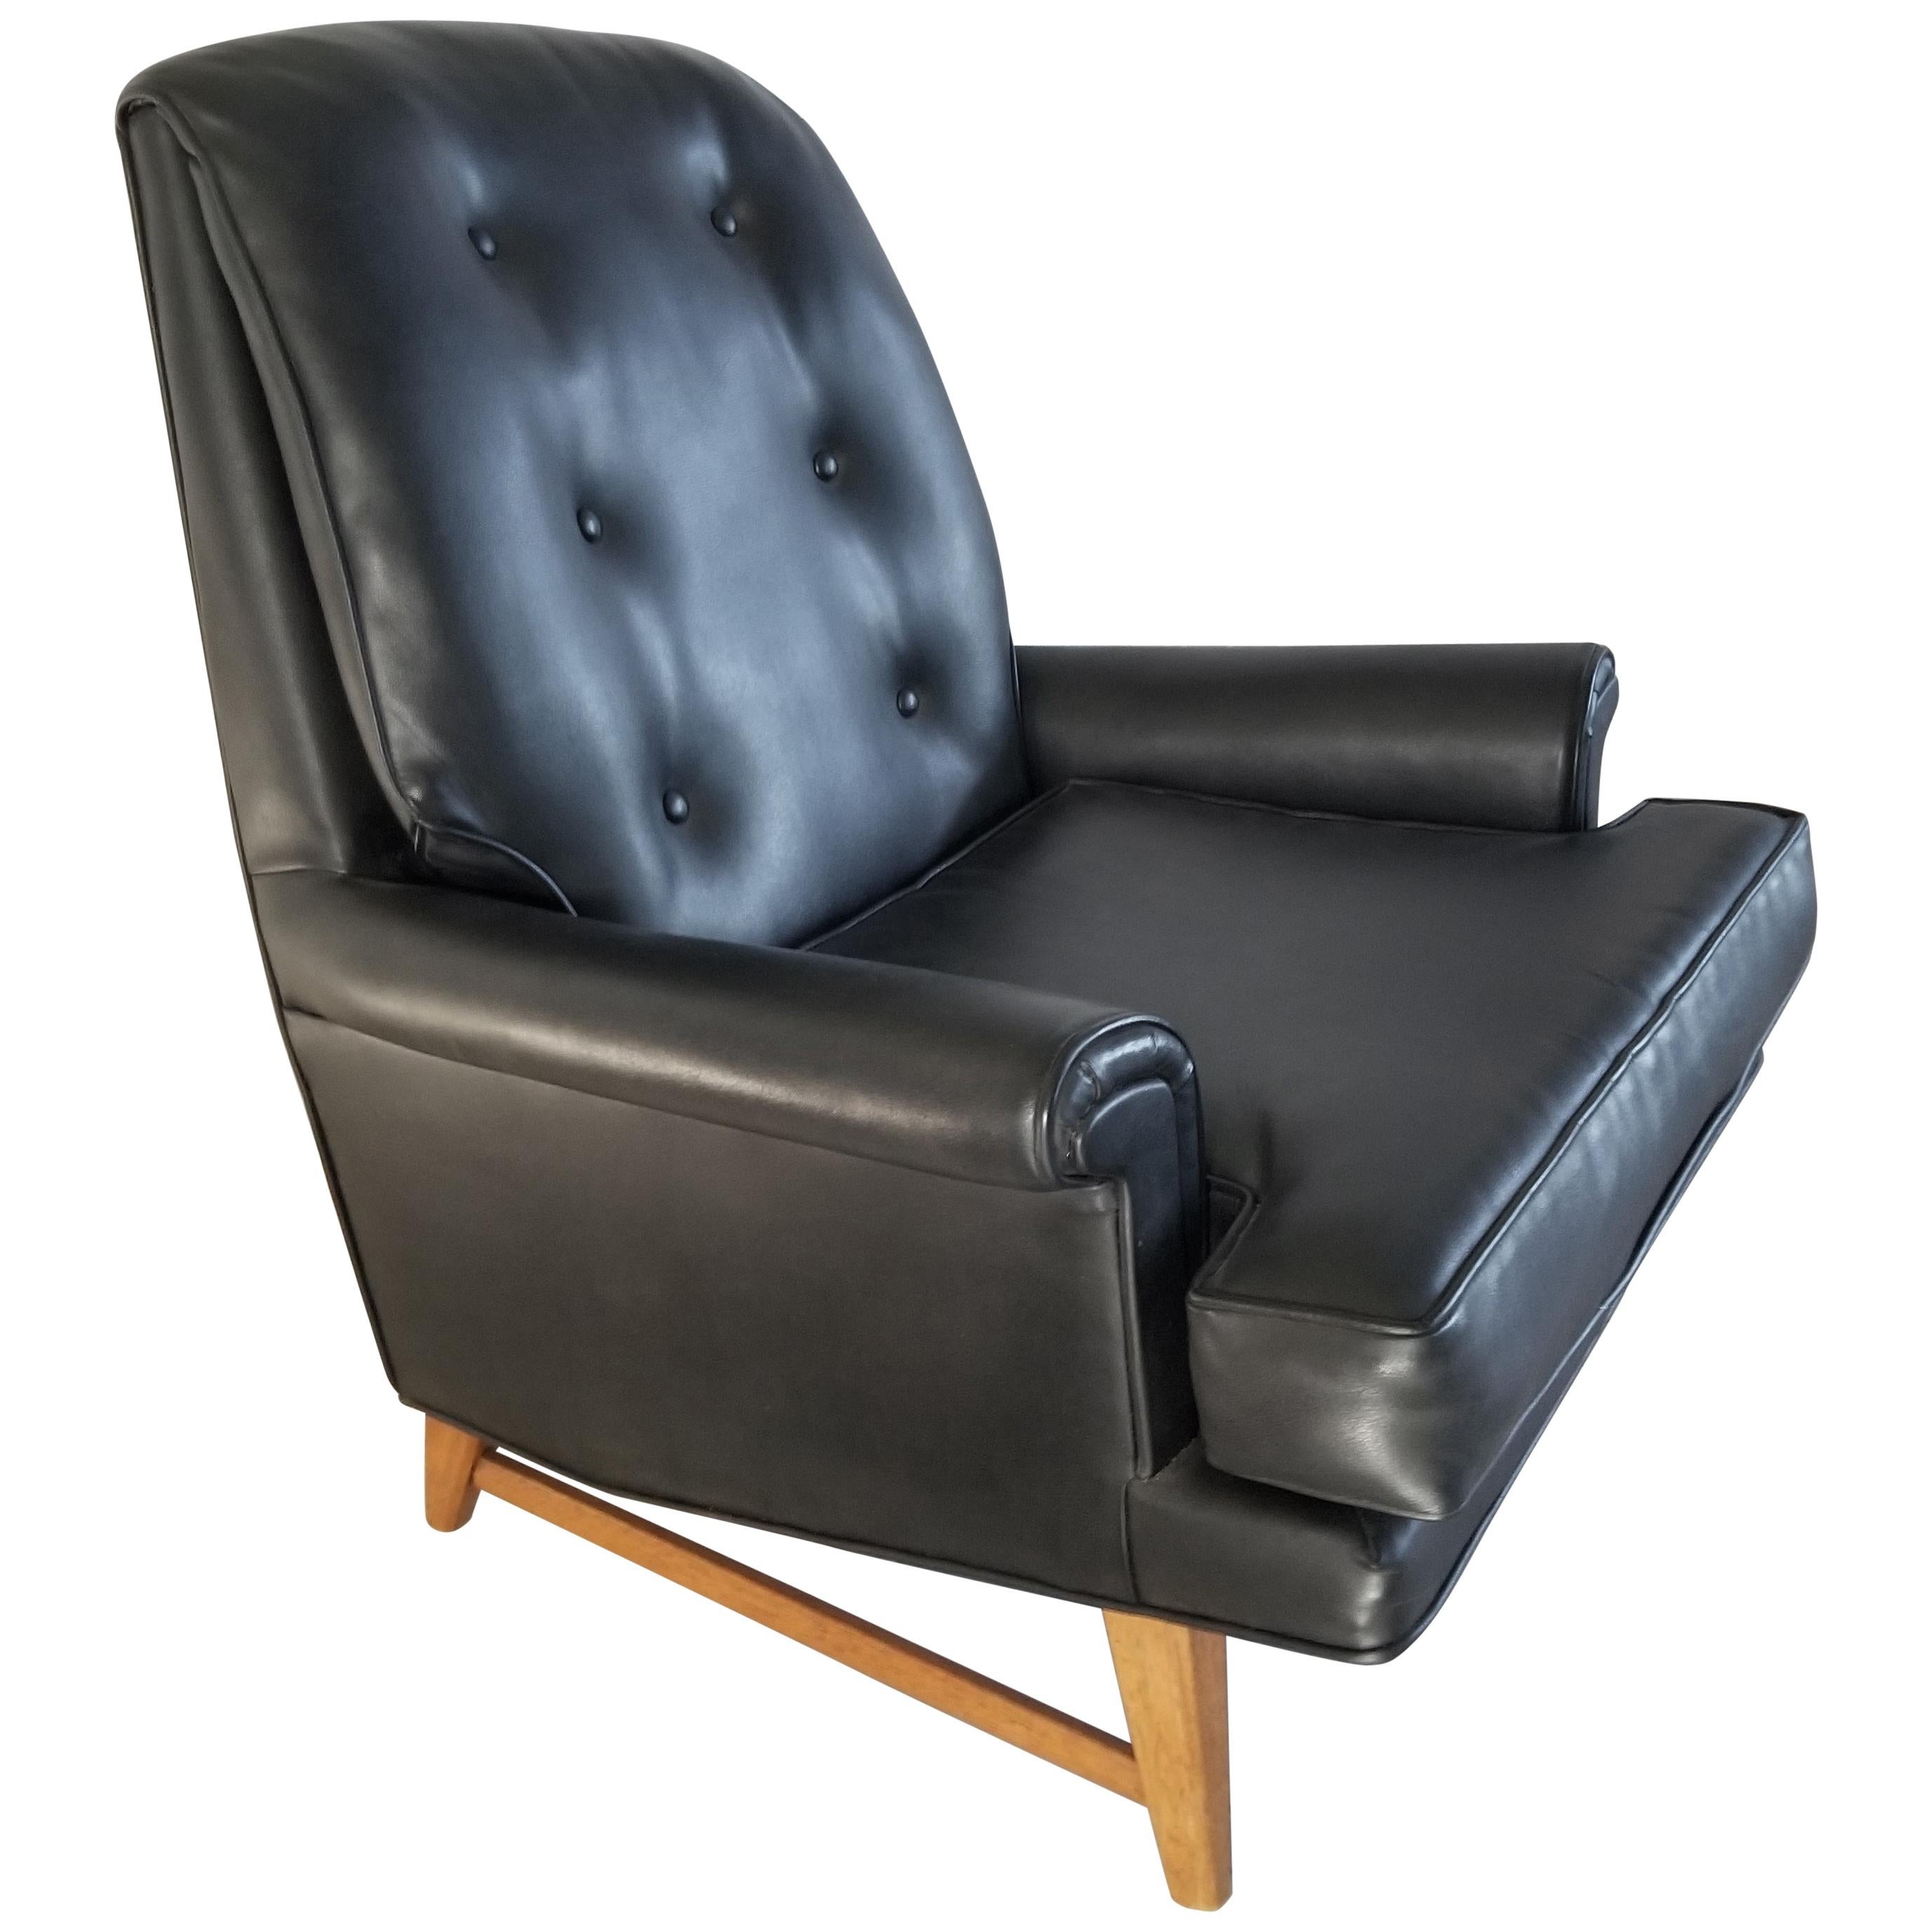 Handsome Heritage Black Faux Leather Lounge Chair 
Edward Wormley for Dunbar Furniture Era Classic 1950s
Faux leather that really looks like leather.
Comfort and good looks perched on a strong mahogany wood base.
Signed Heritage label
32.5 W x 35.5